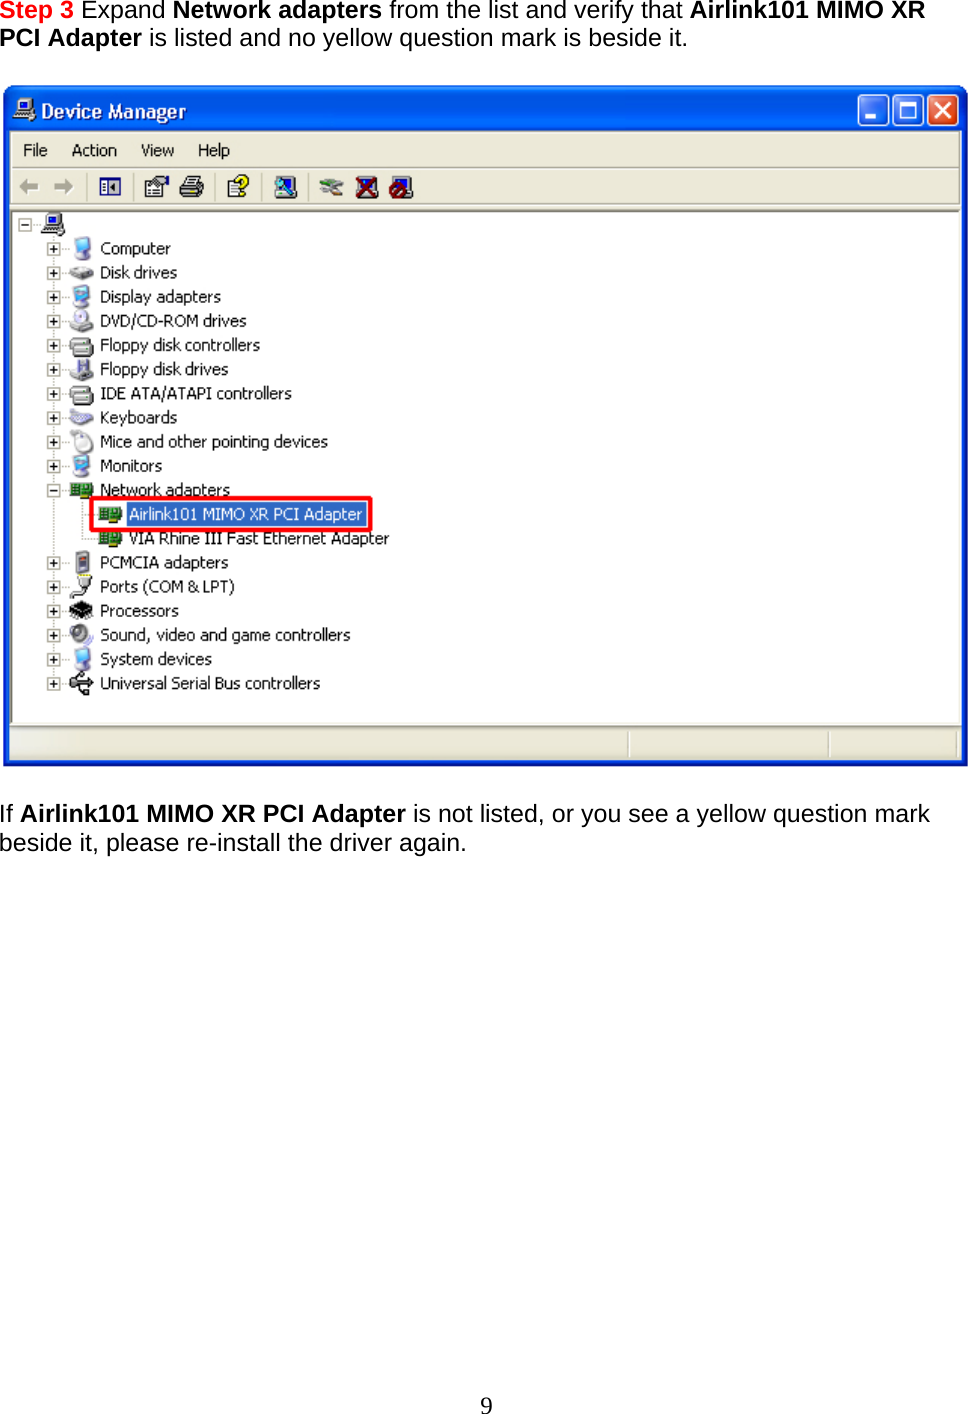 Step 3 Expand Network adapters from the list and verify that Airlink101 MIMO XR PCI Adapter is listed and no yellow question mark is beside it.    If Airlink101 MIMO XR PCI Adapter is not listed, or you see a yellow question mark beside it, please re-install the driver again.                 9 